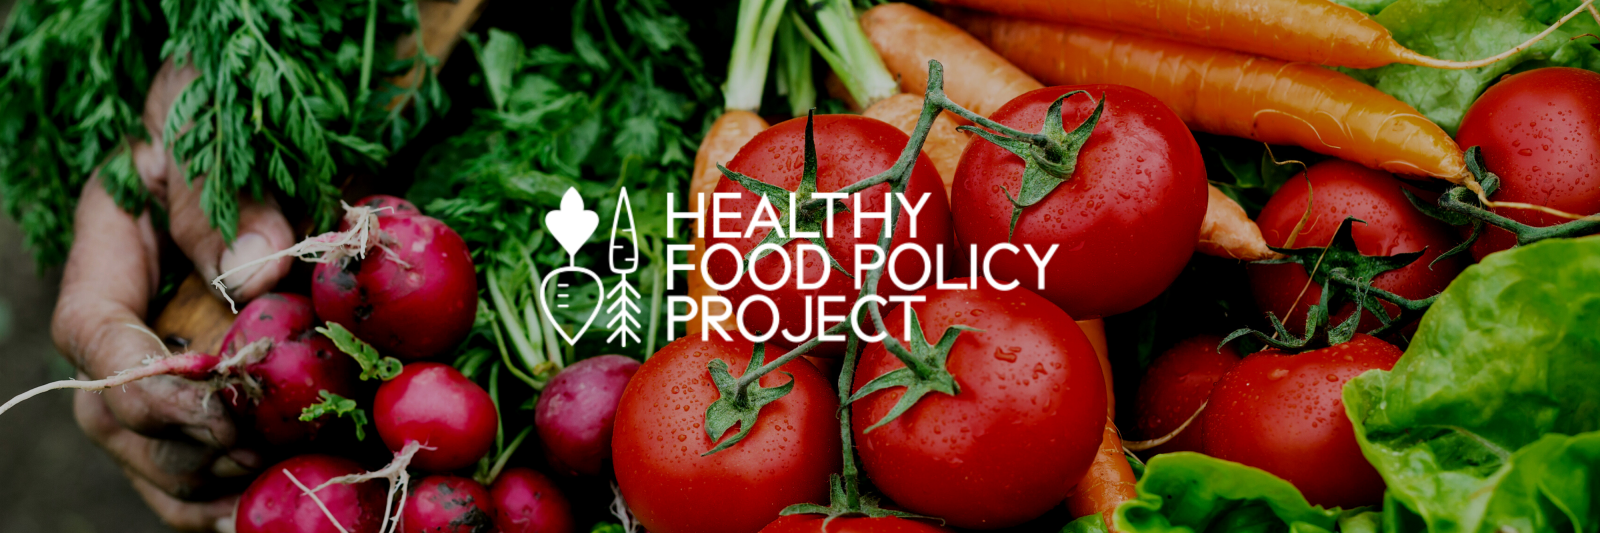 Healthy Food Policy Project logo on top of an image of vegetables: radishes, tomatoes, and carrots.